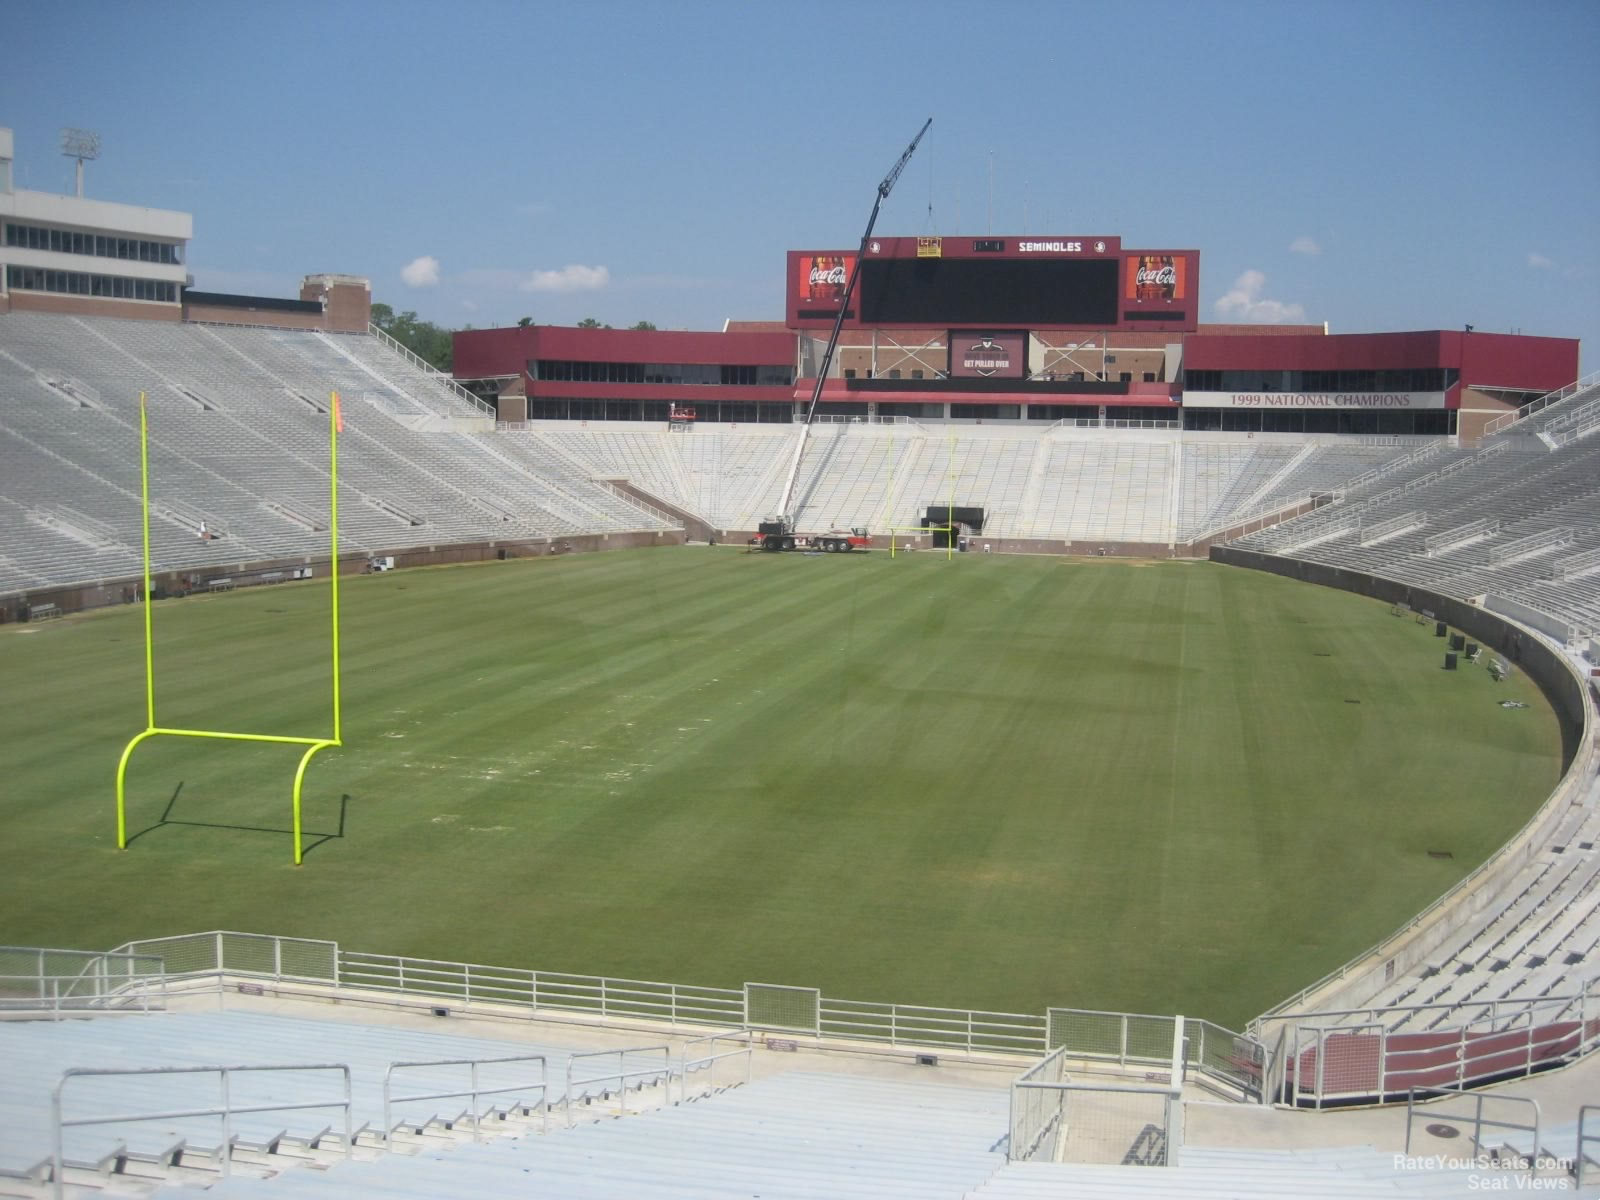 section 118, row 40 seat view  - doak campbell stadium